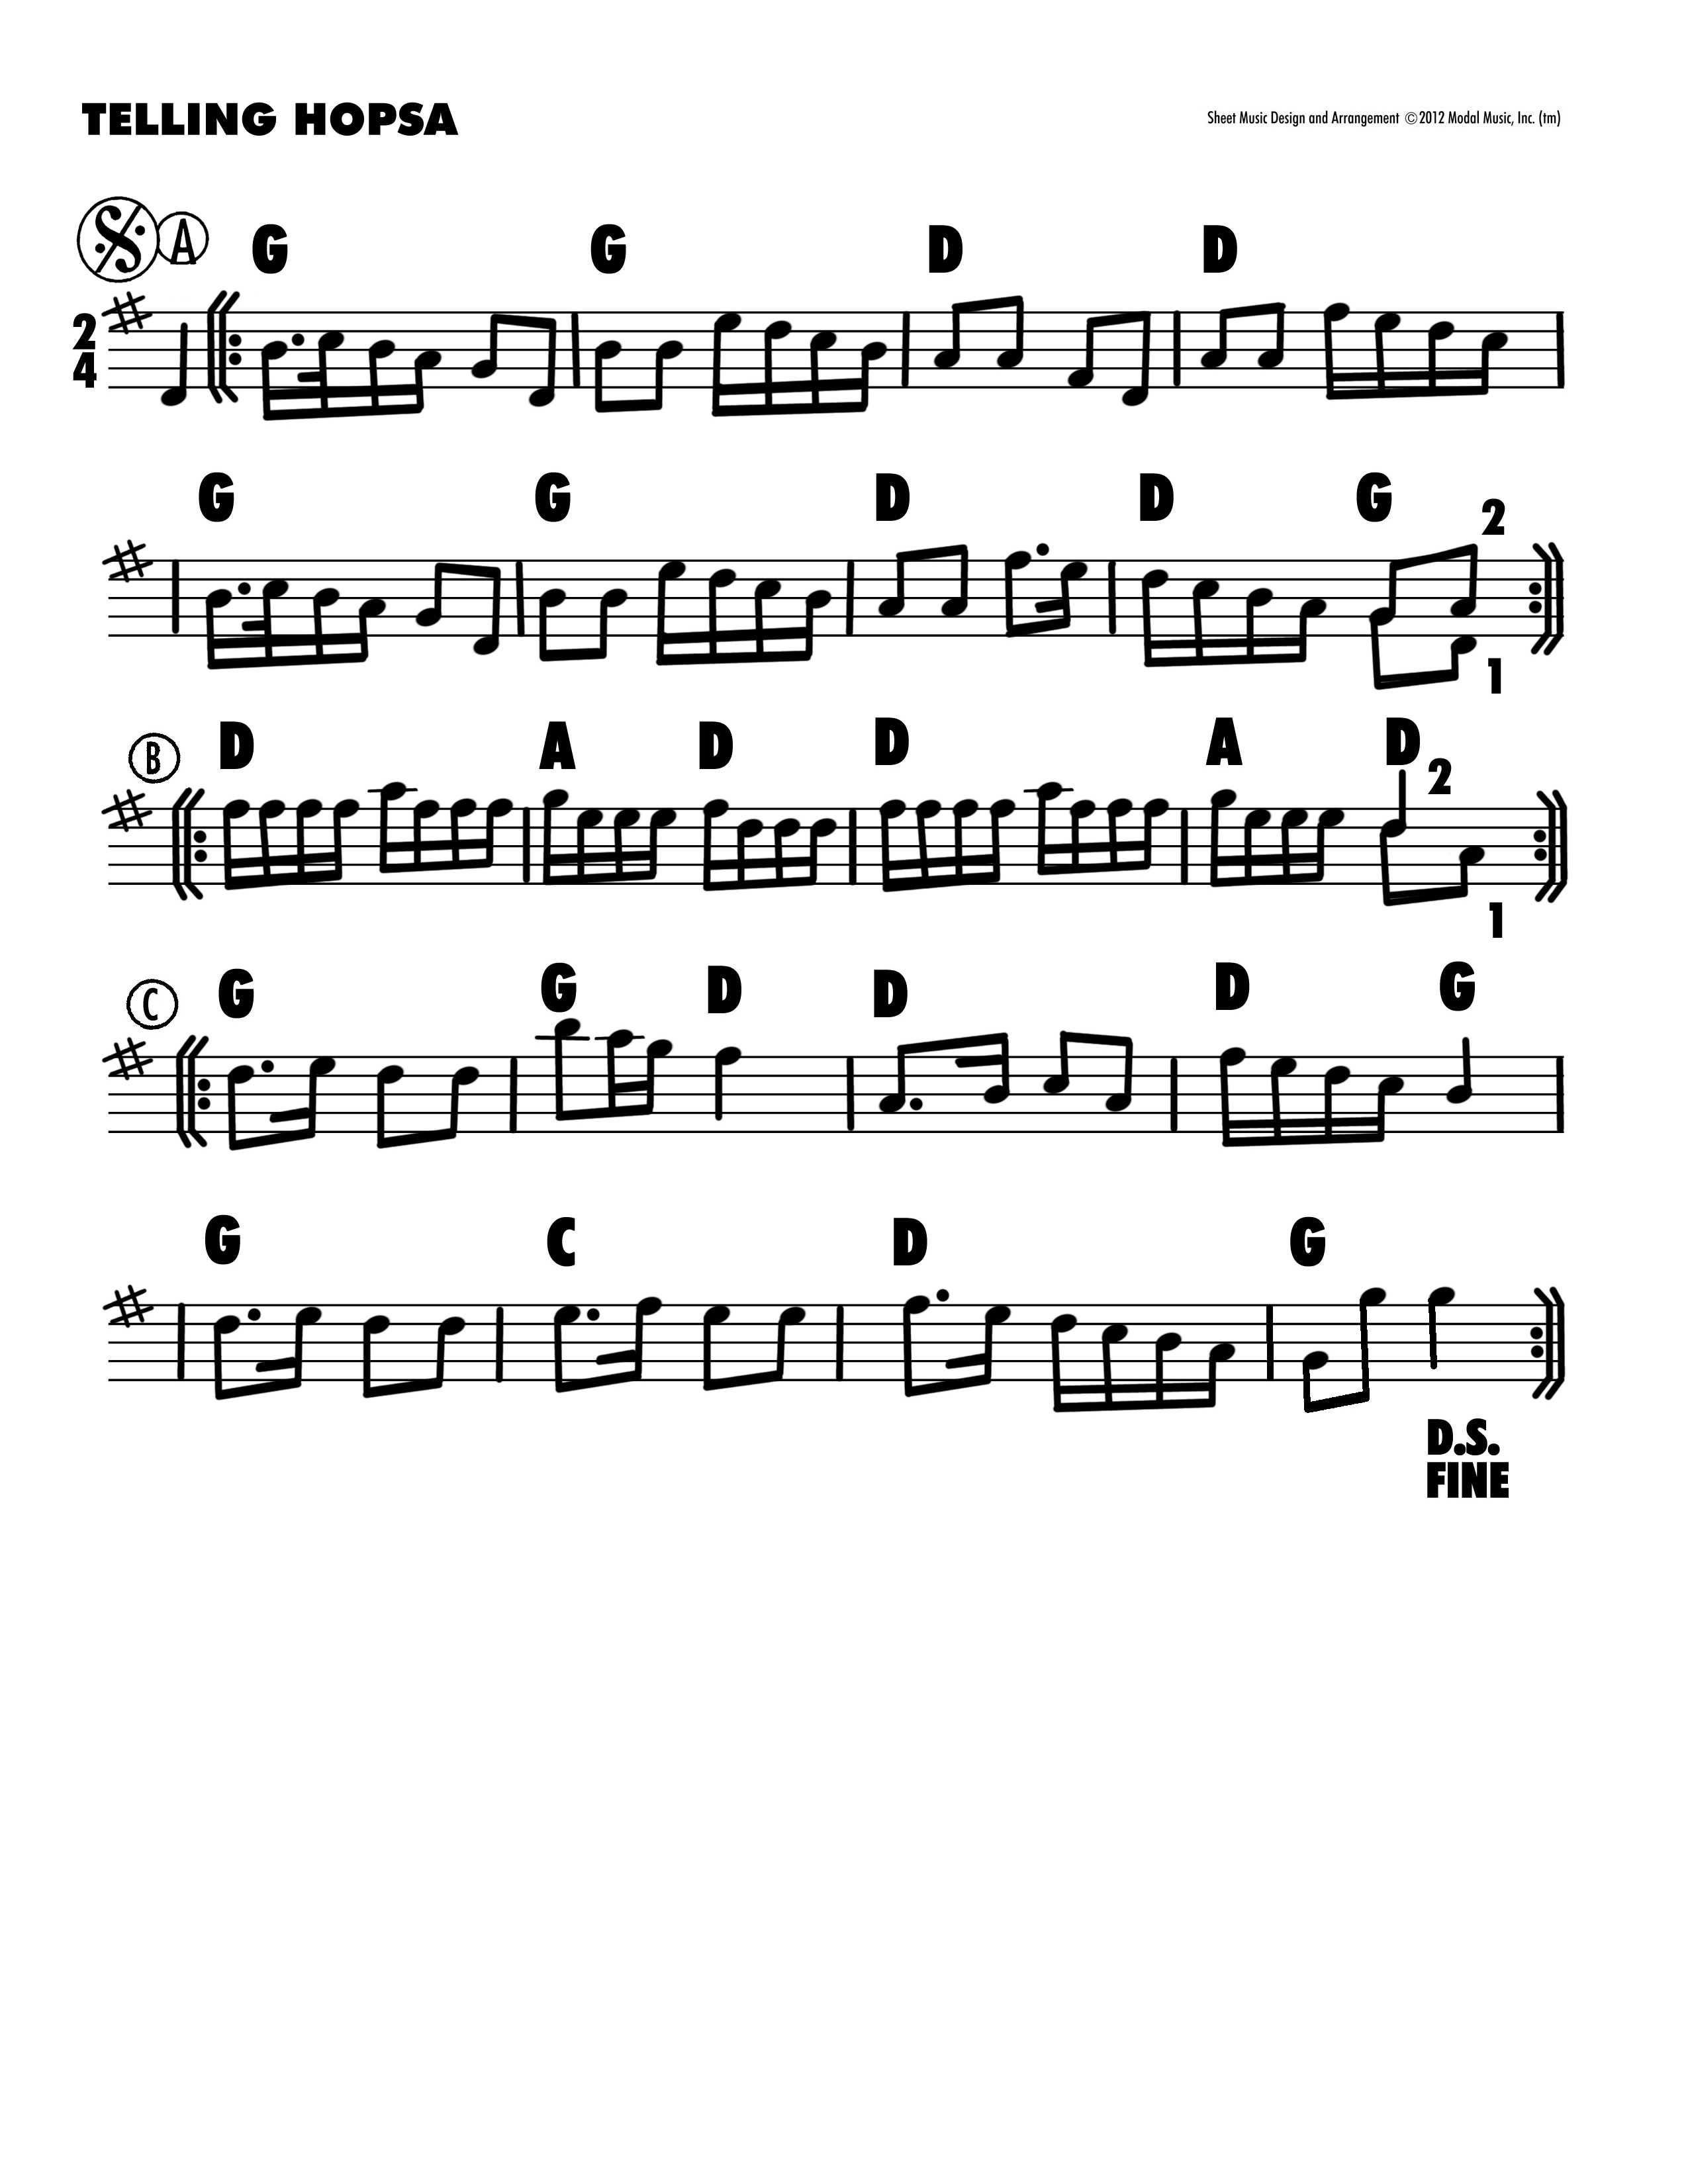 Image of sheet music of Telling Hopsa that accompanies the Jutta & the Hi-Dukes (tm) presentation at Paul Tyler’s Fiddle Club. Click on link to download.